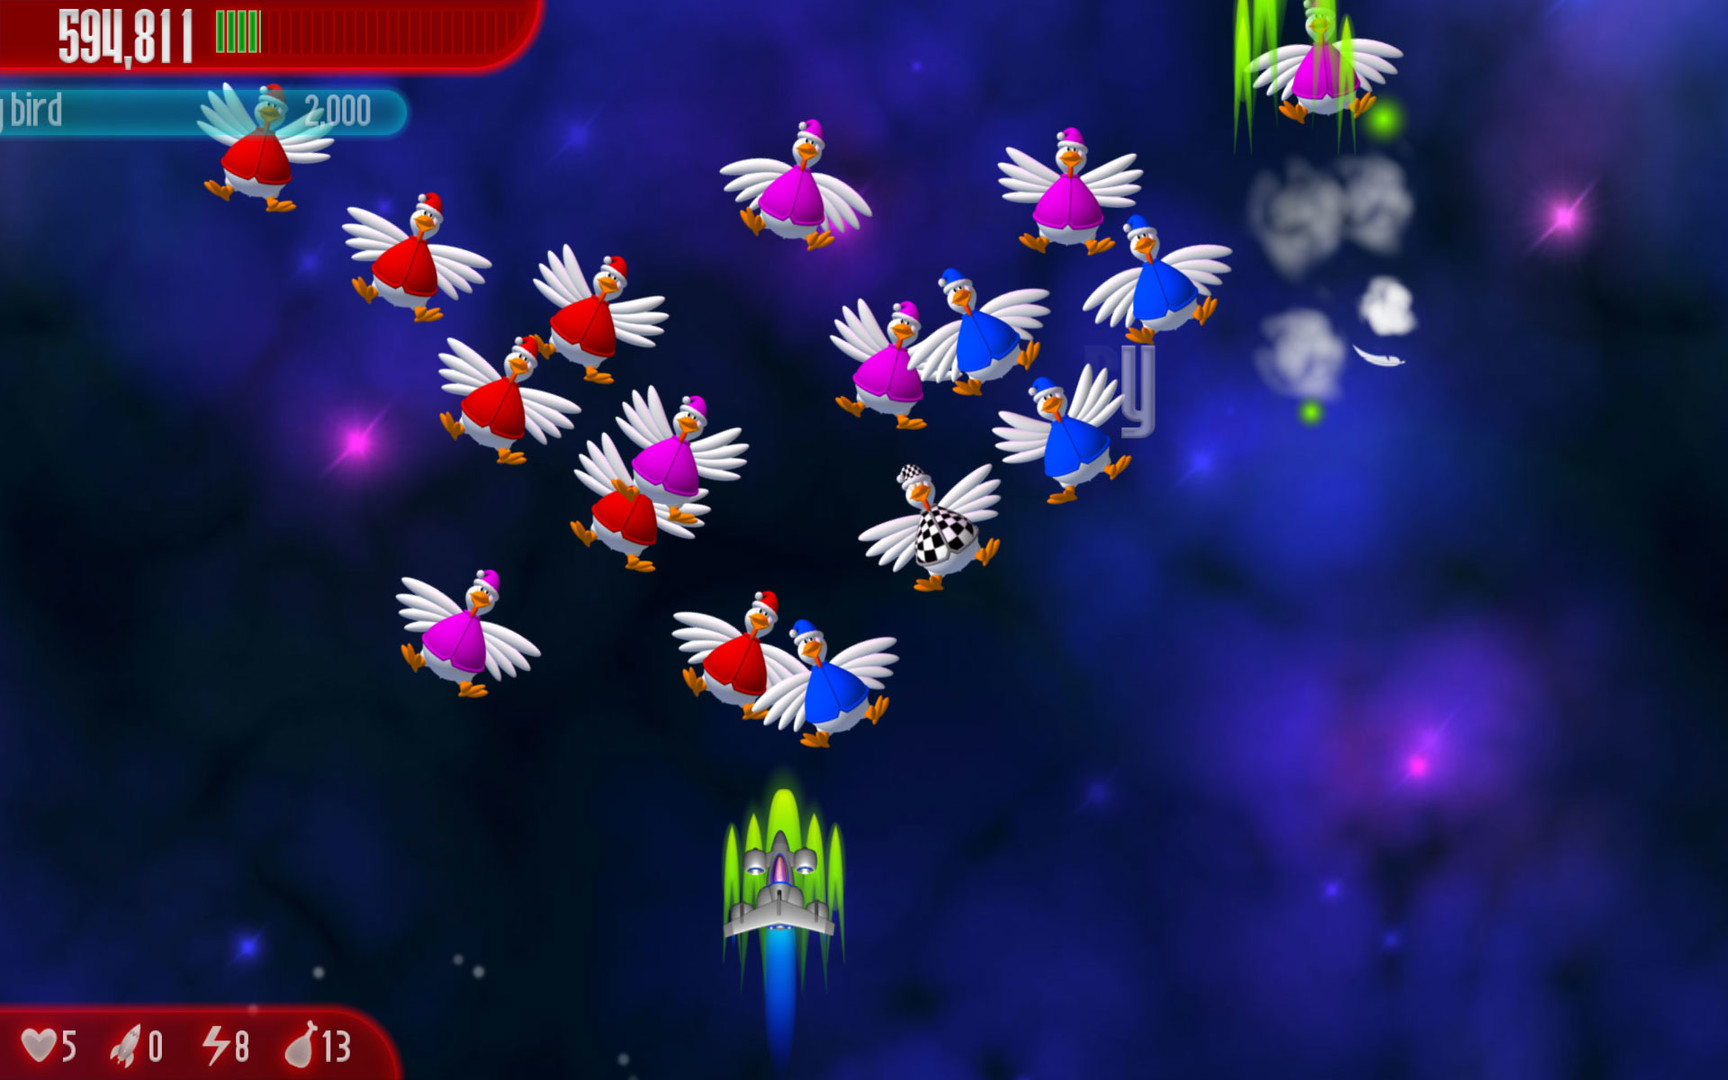 christmas chicken invaders free download